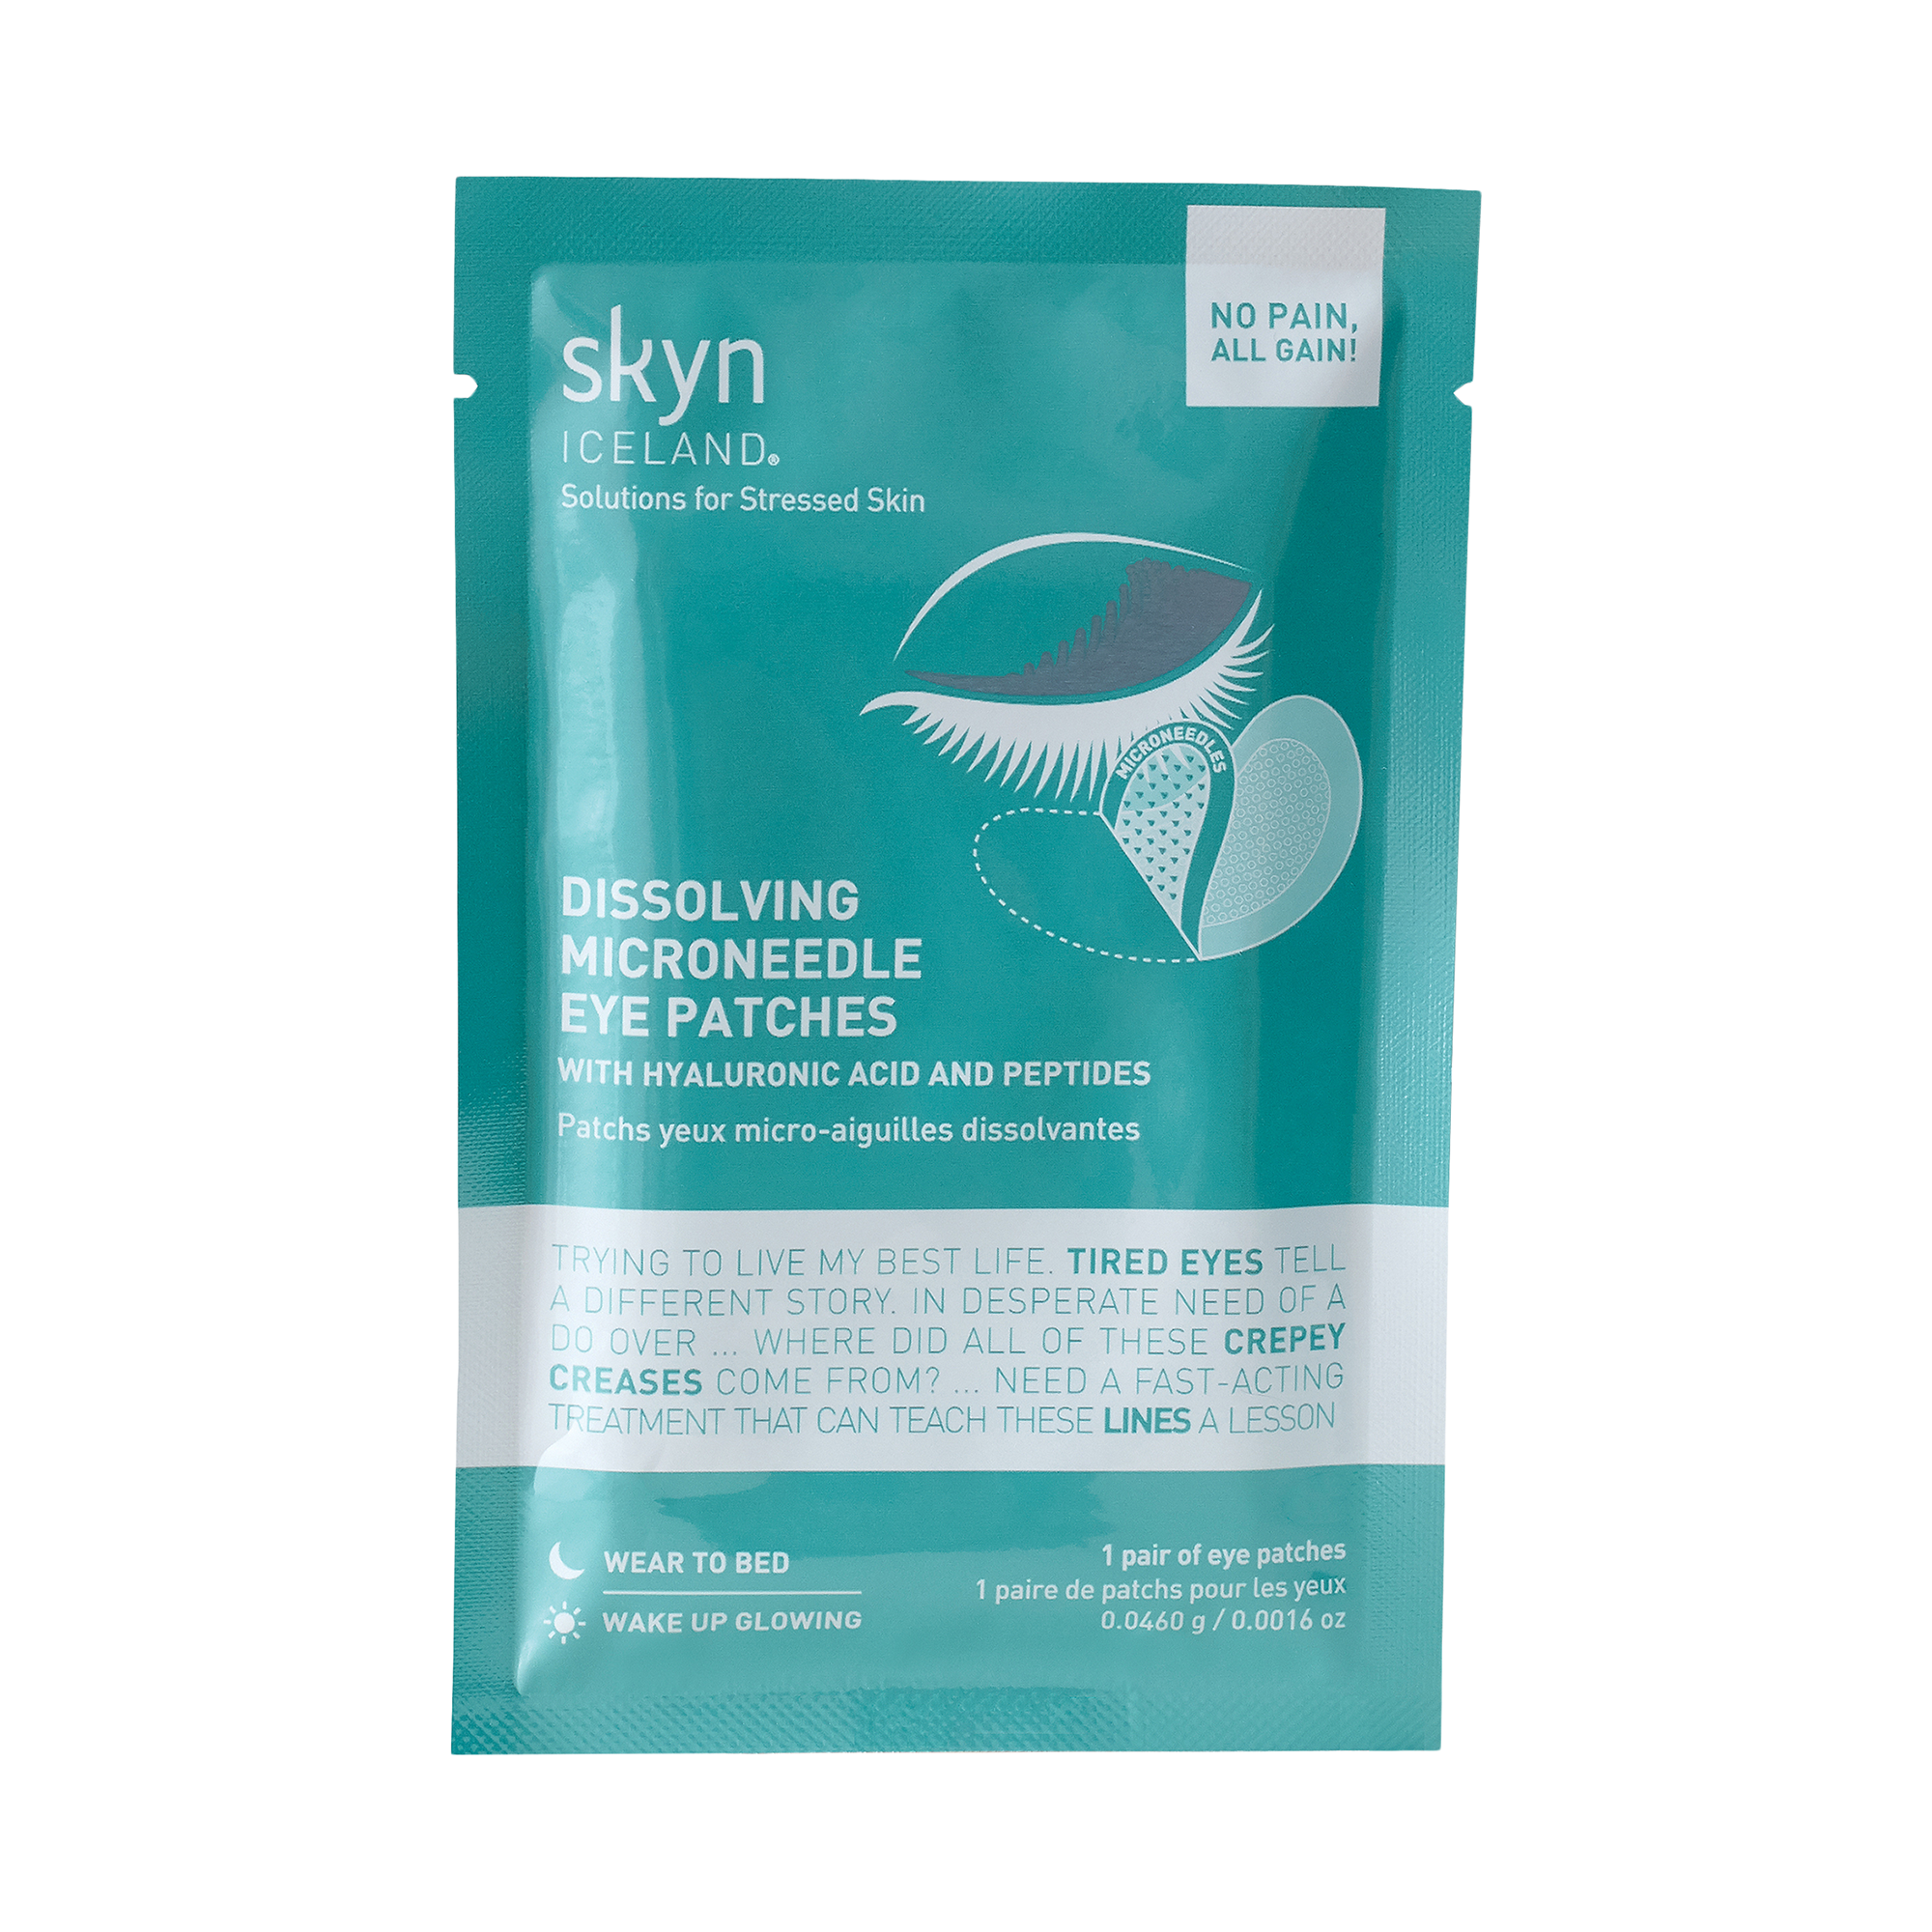 Skyn Iceland Dissolving Microneedle Eye Patches / 1 pair